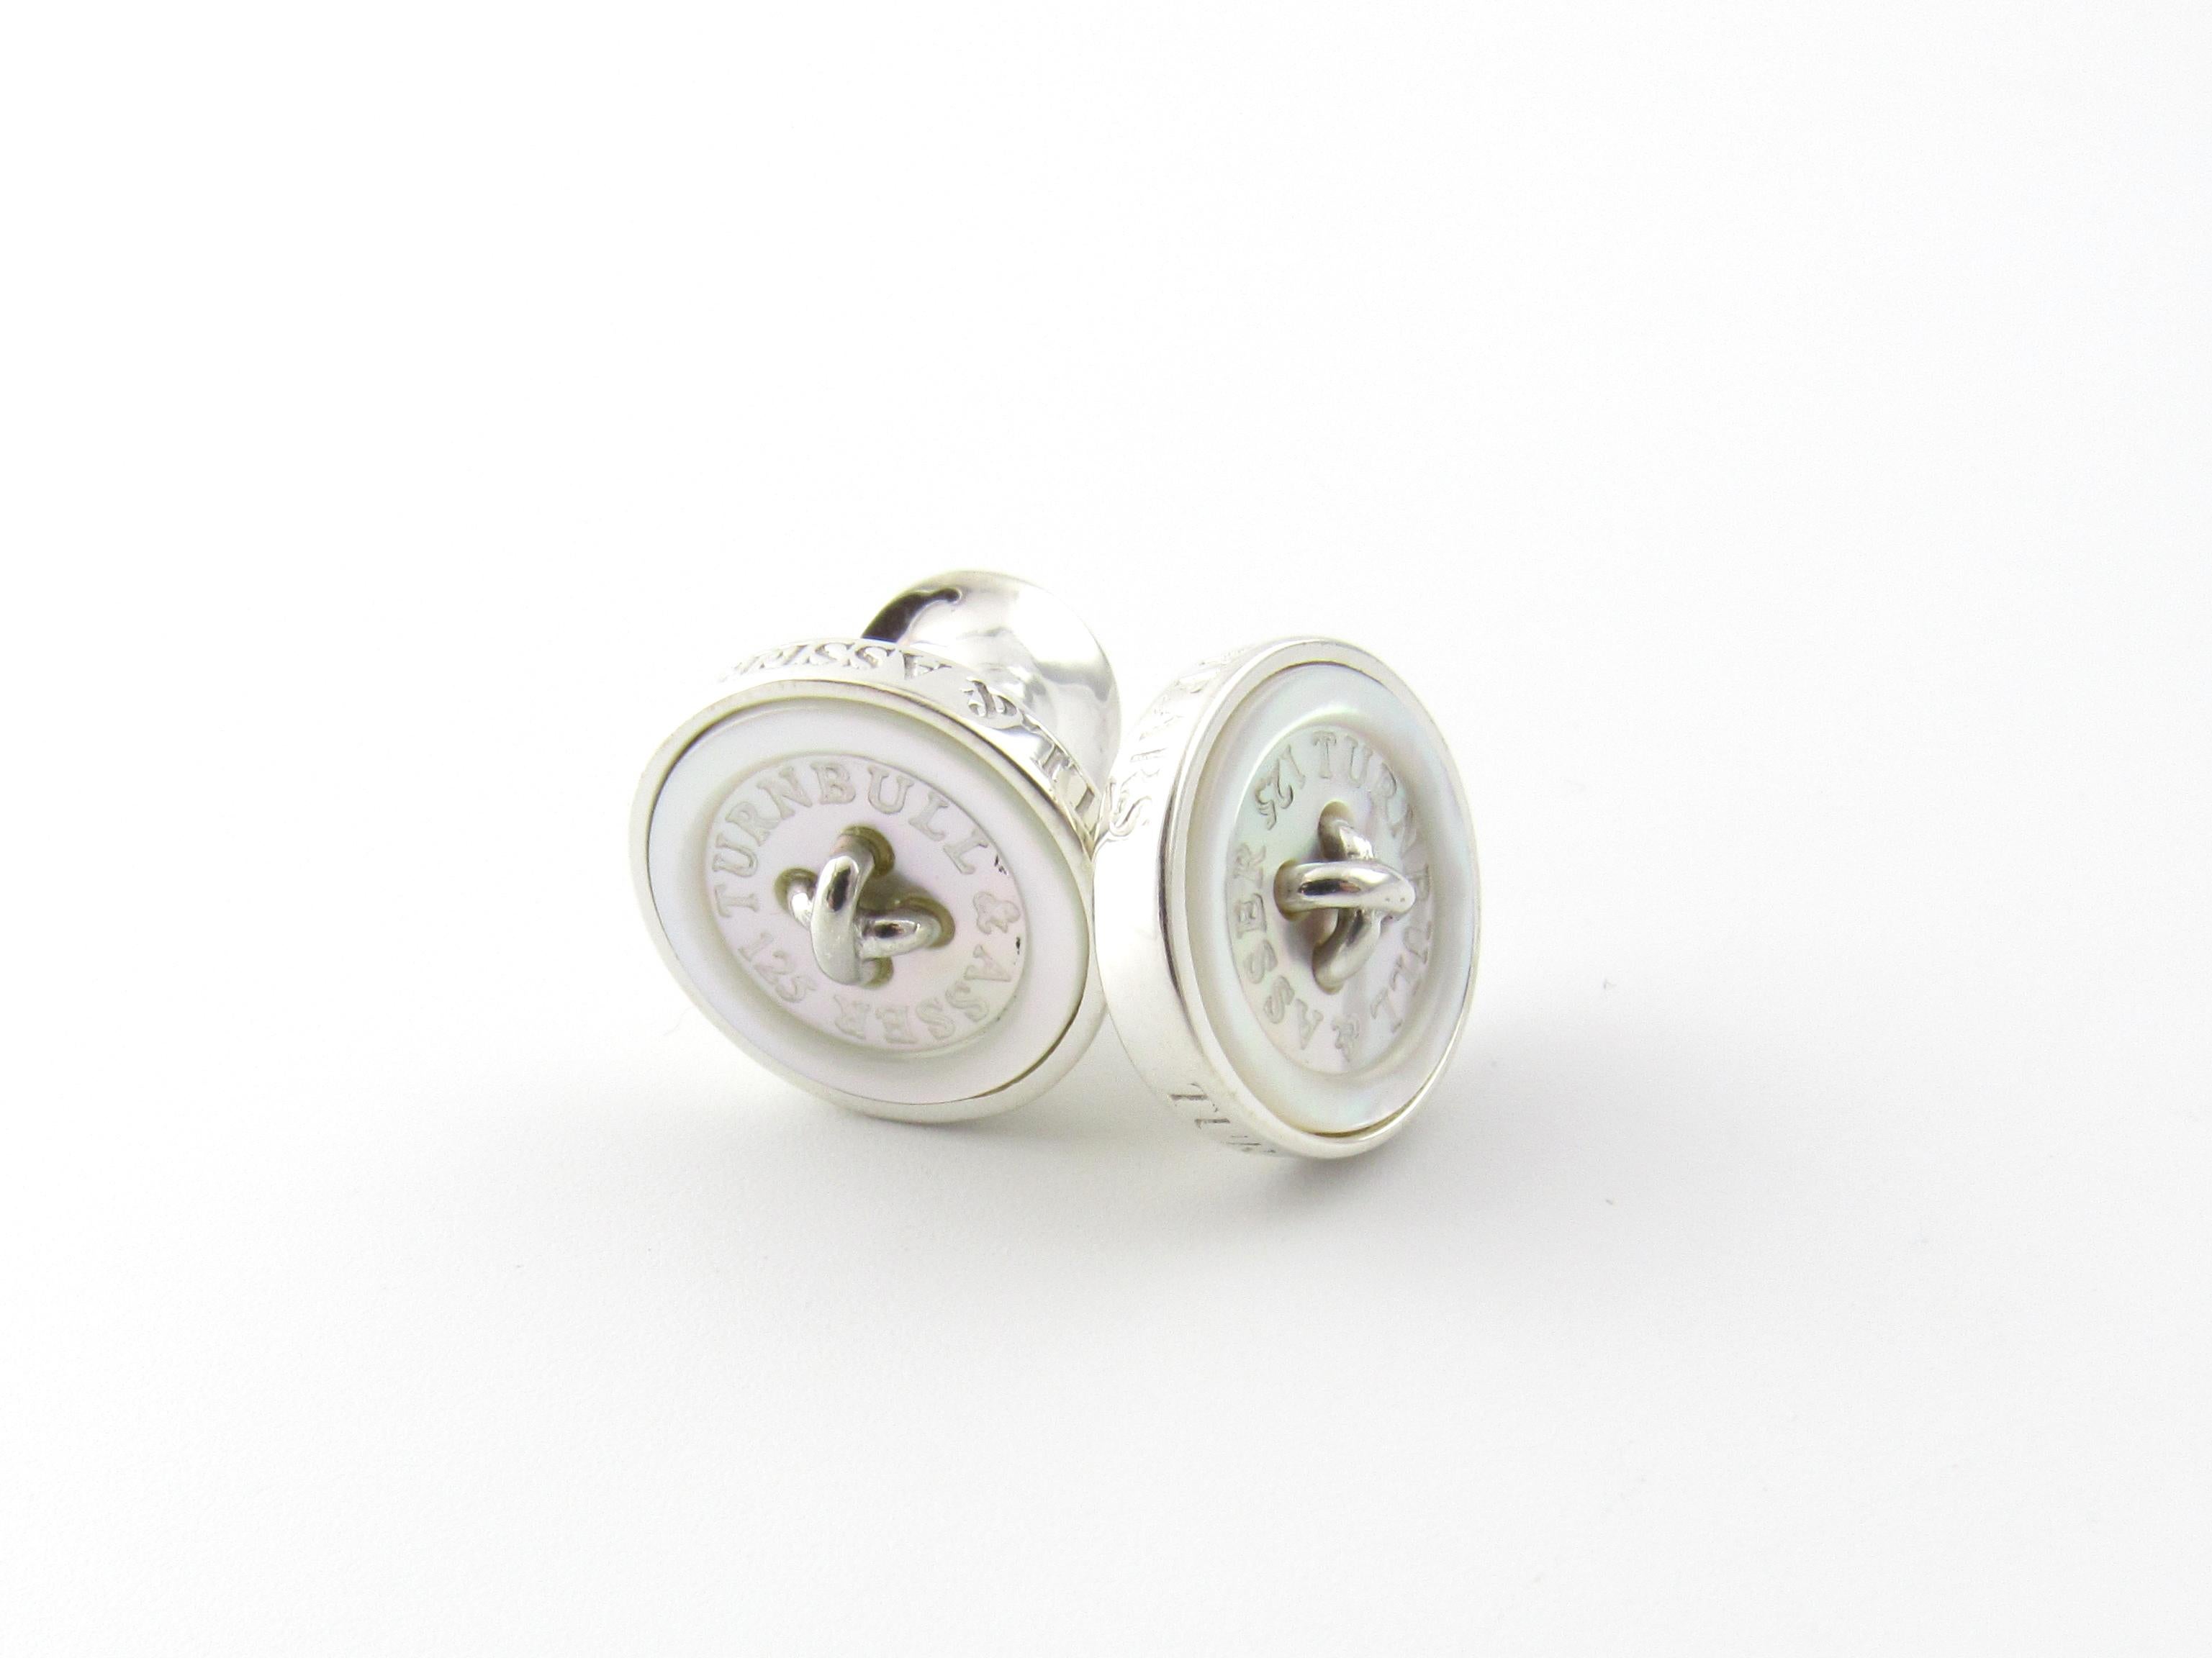 Men's Turnbull & Asser Sterling Silver and Mother of Pearl Button Cufflinks